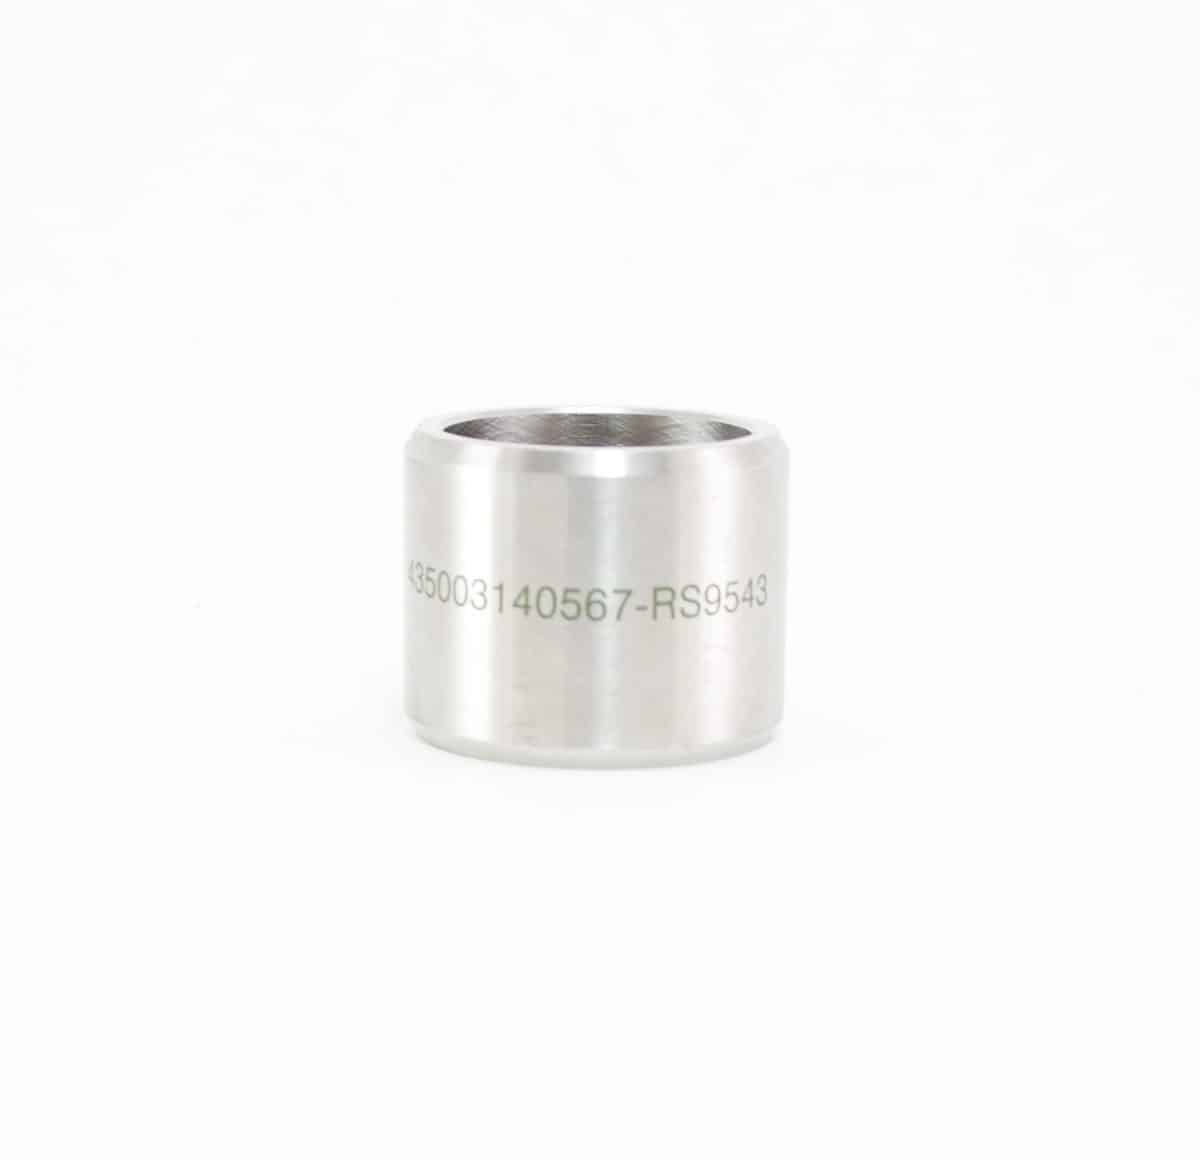 Circumferential Marking on Stainless Steel Ring